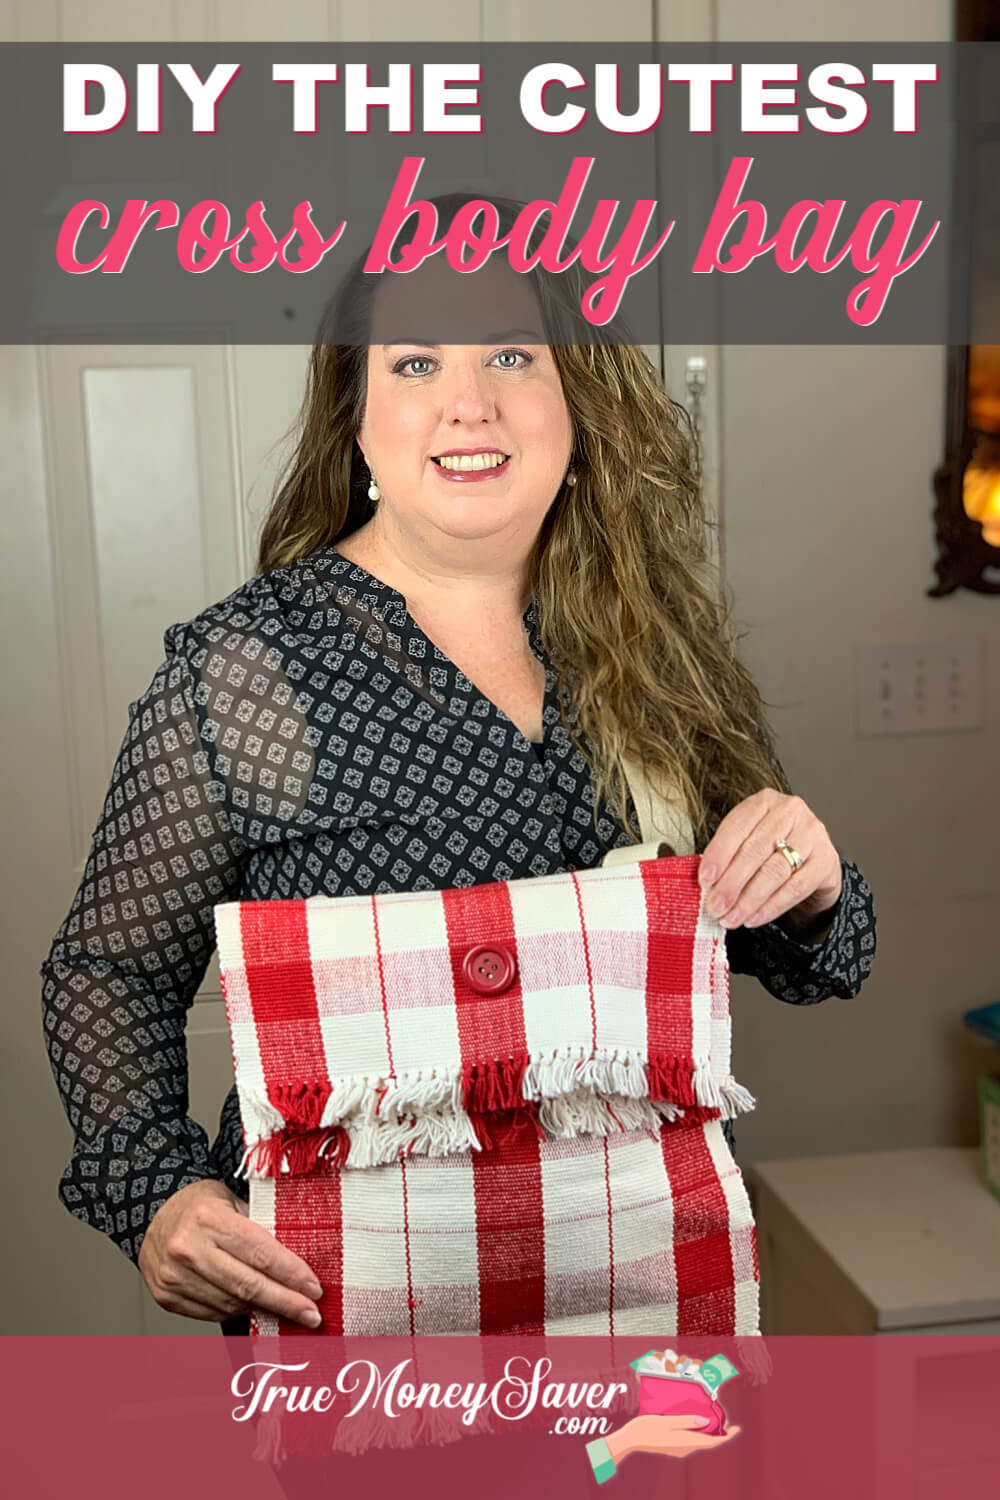 How To Make The Cutest Cross Body Bag Today